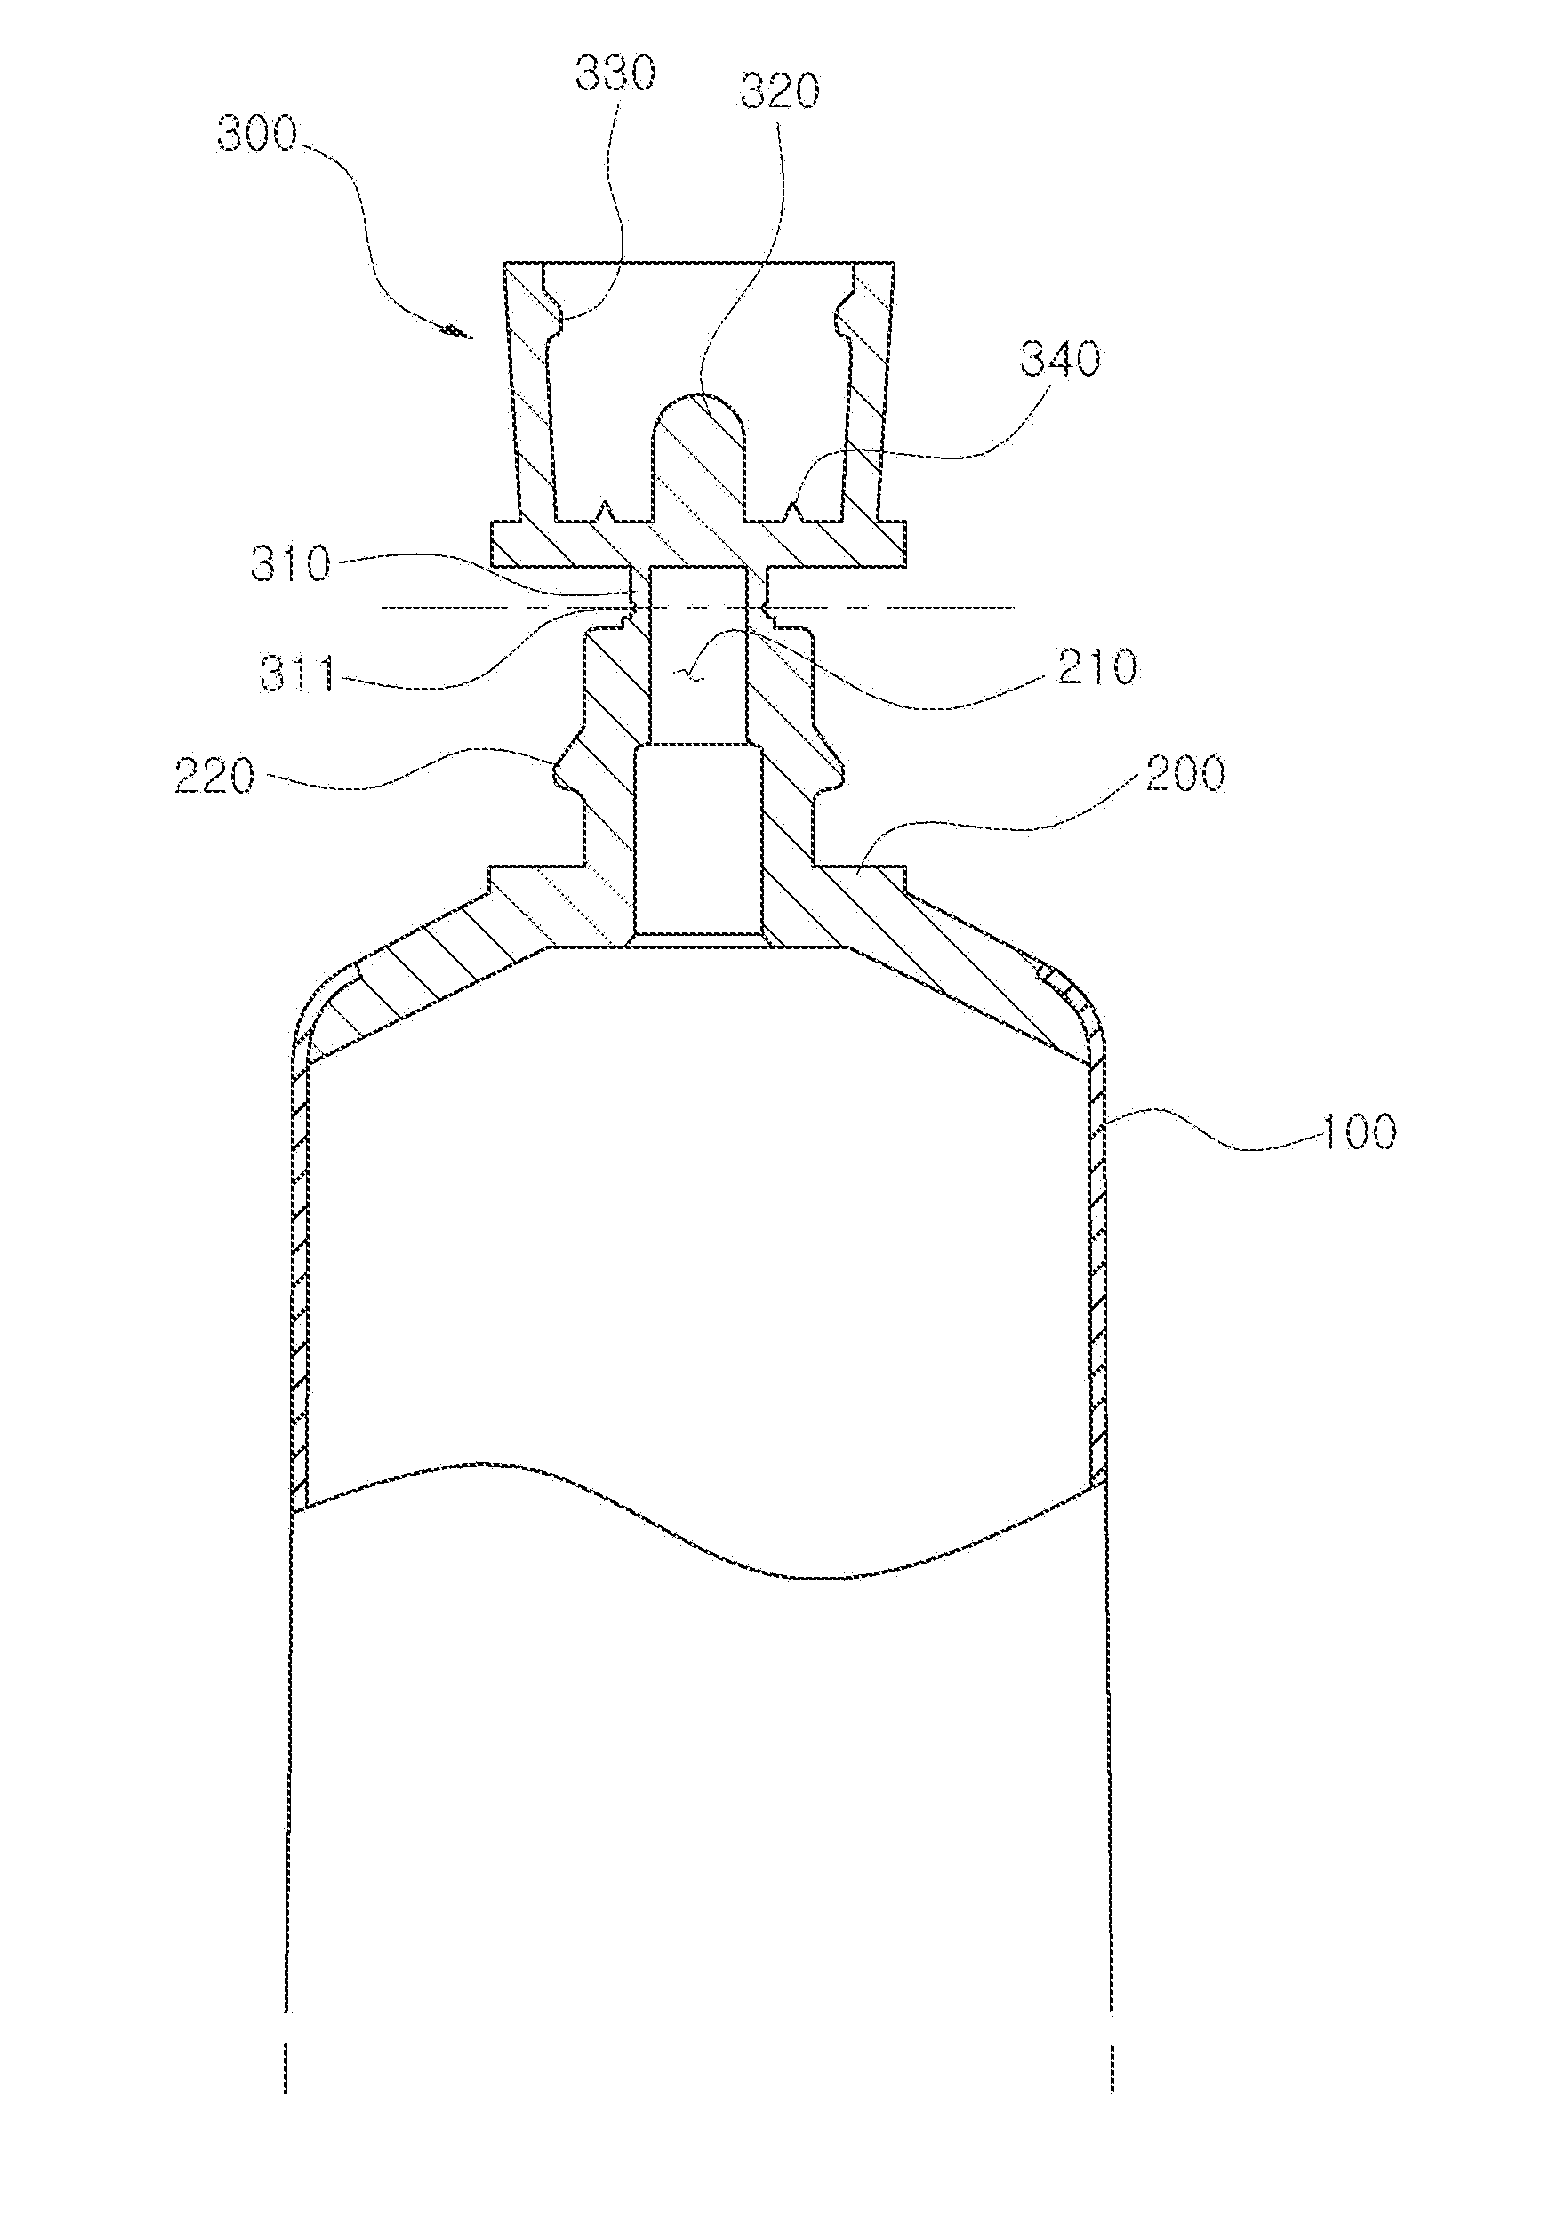 Disposable tubular container having an integrated cap